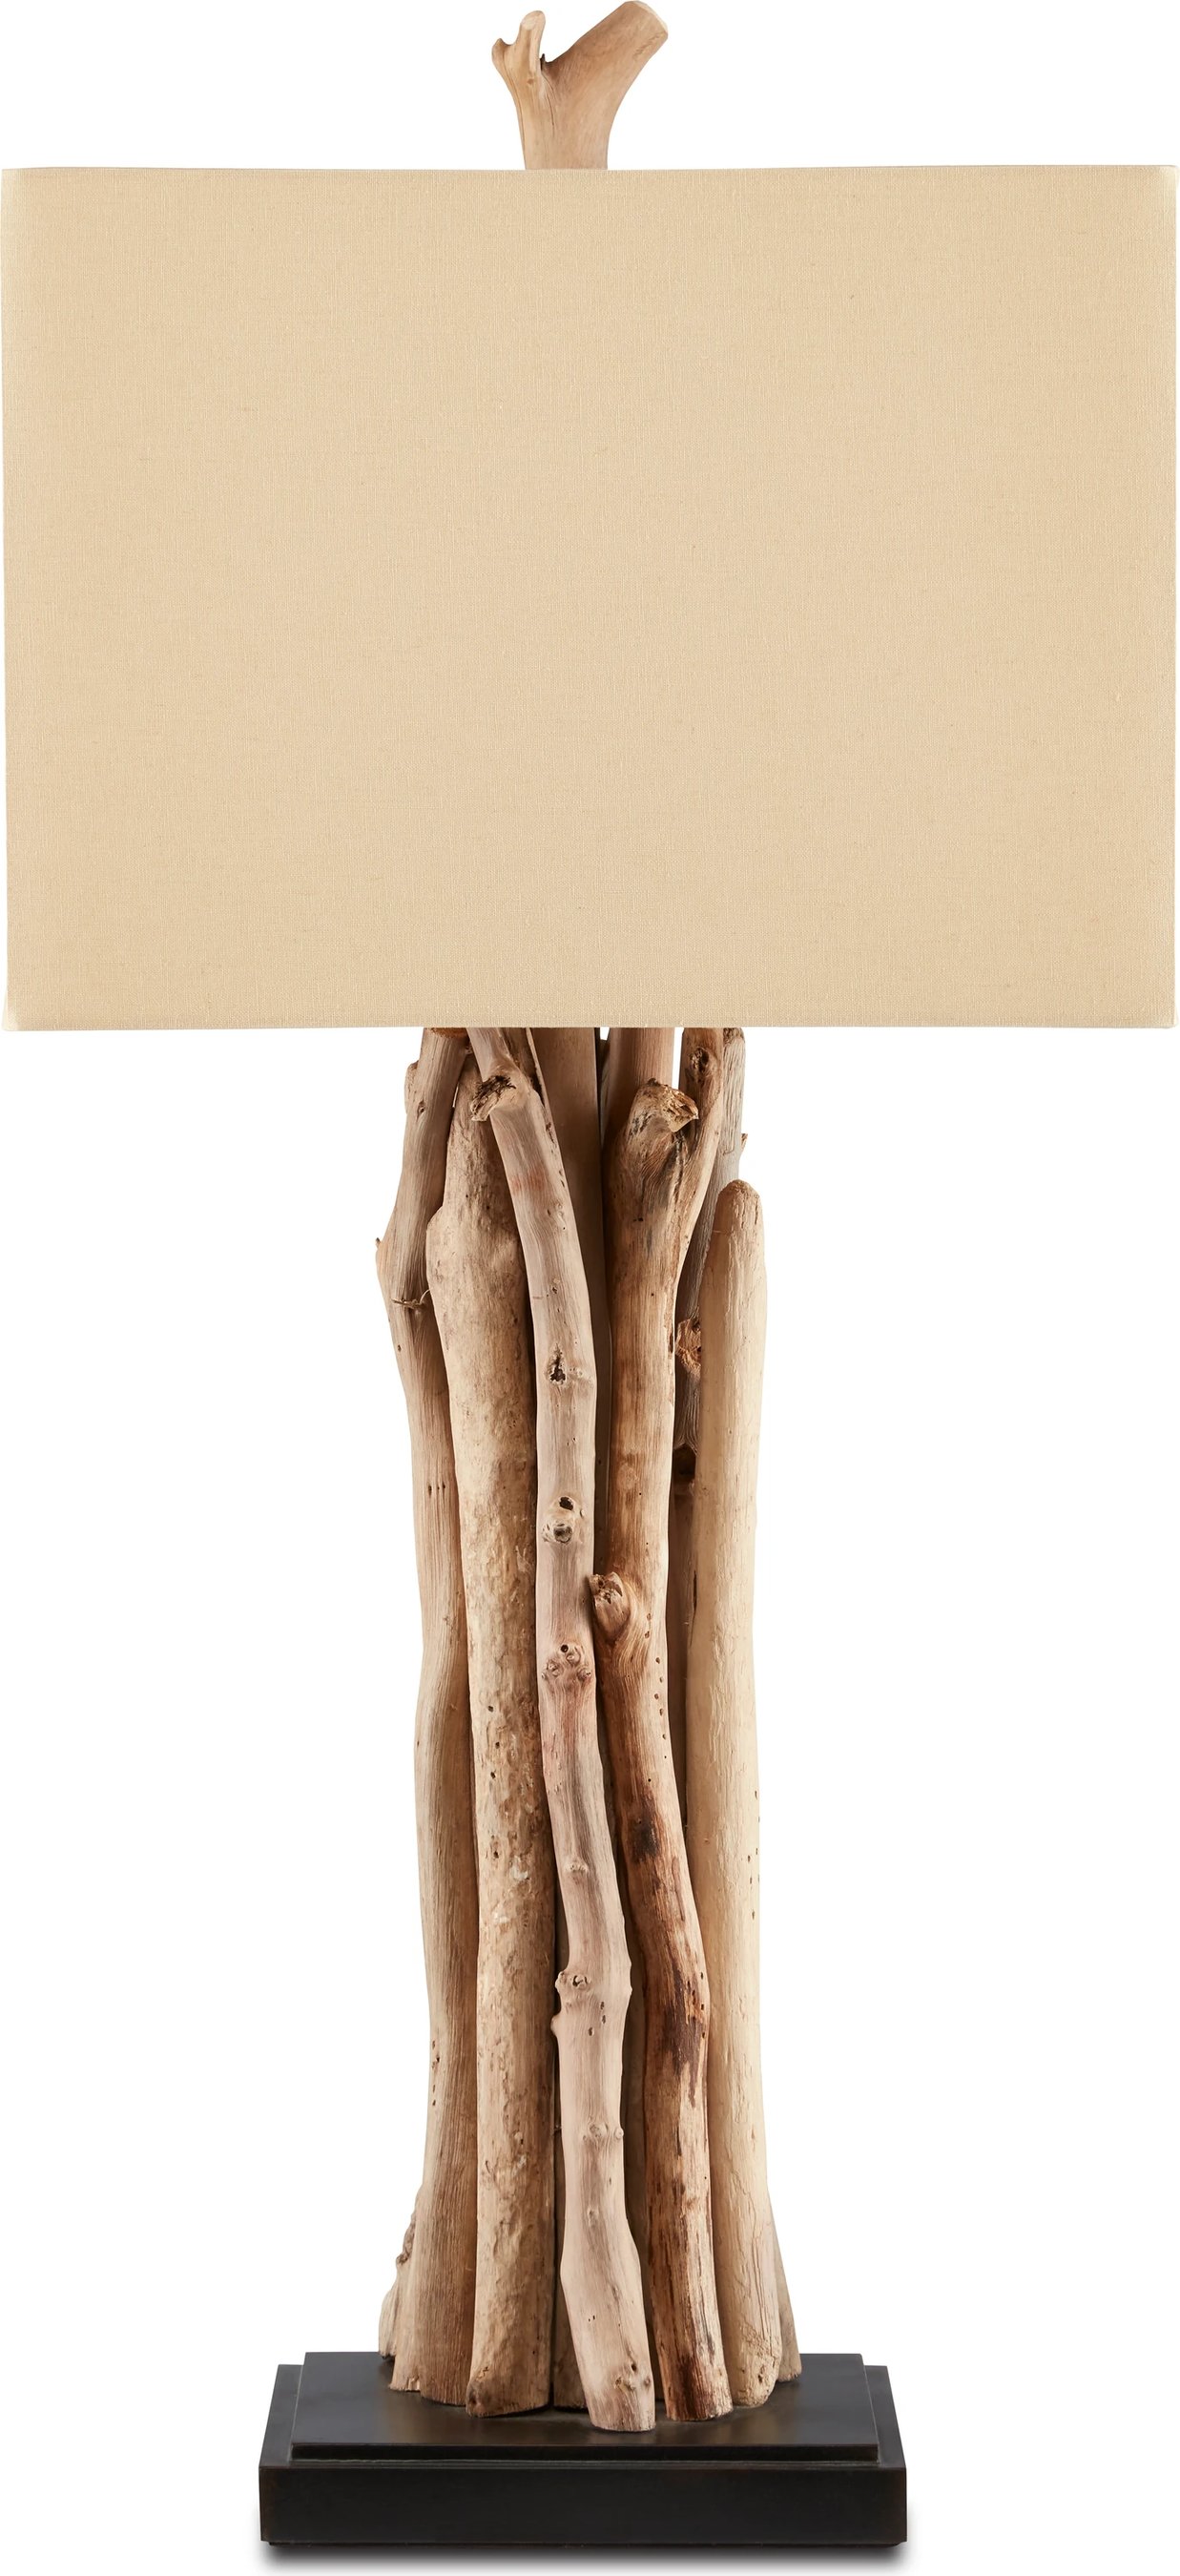 Currey and Company Driftwood Table Lamp | Layla Grayce